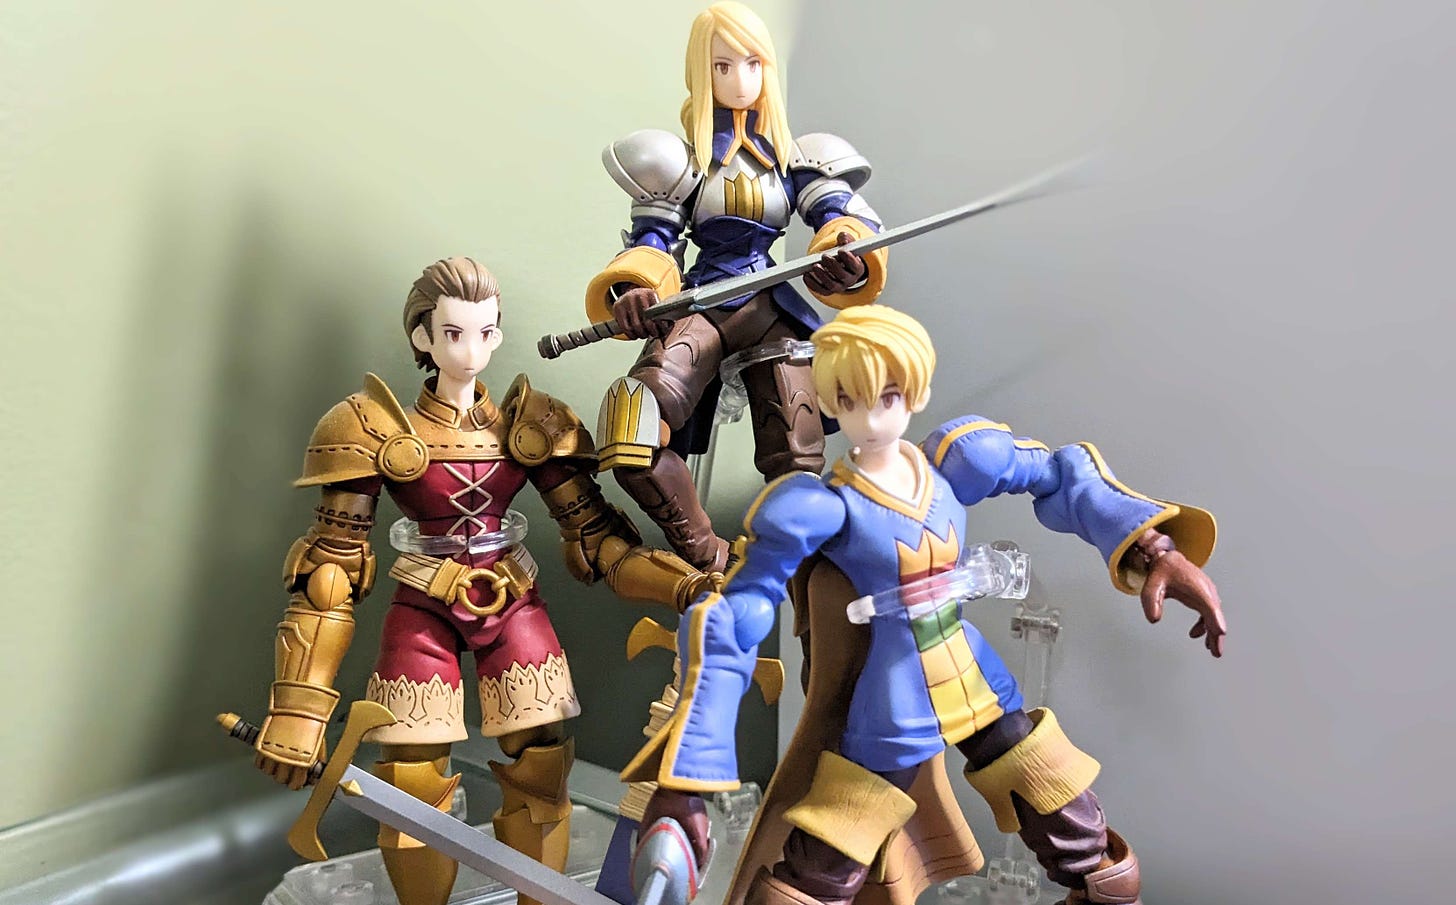 Plastic figurines of Ramza, Delita, and Agrias, from Final Fantasy Tactics.